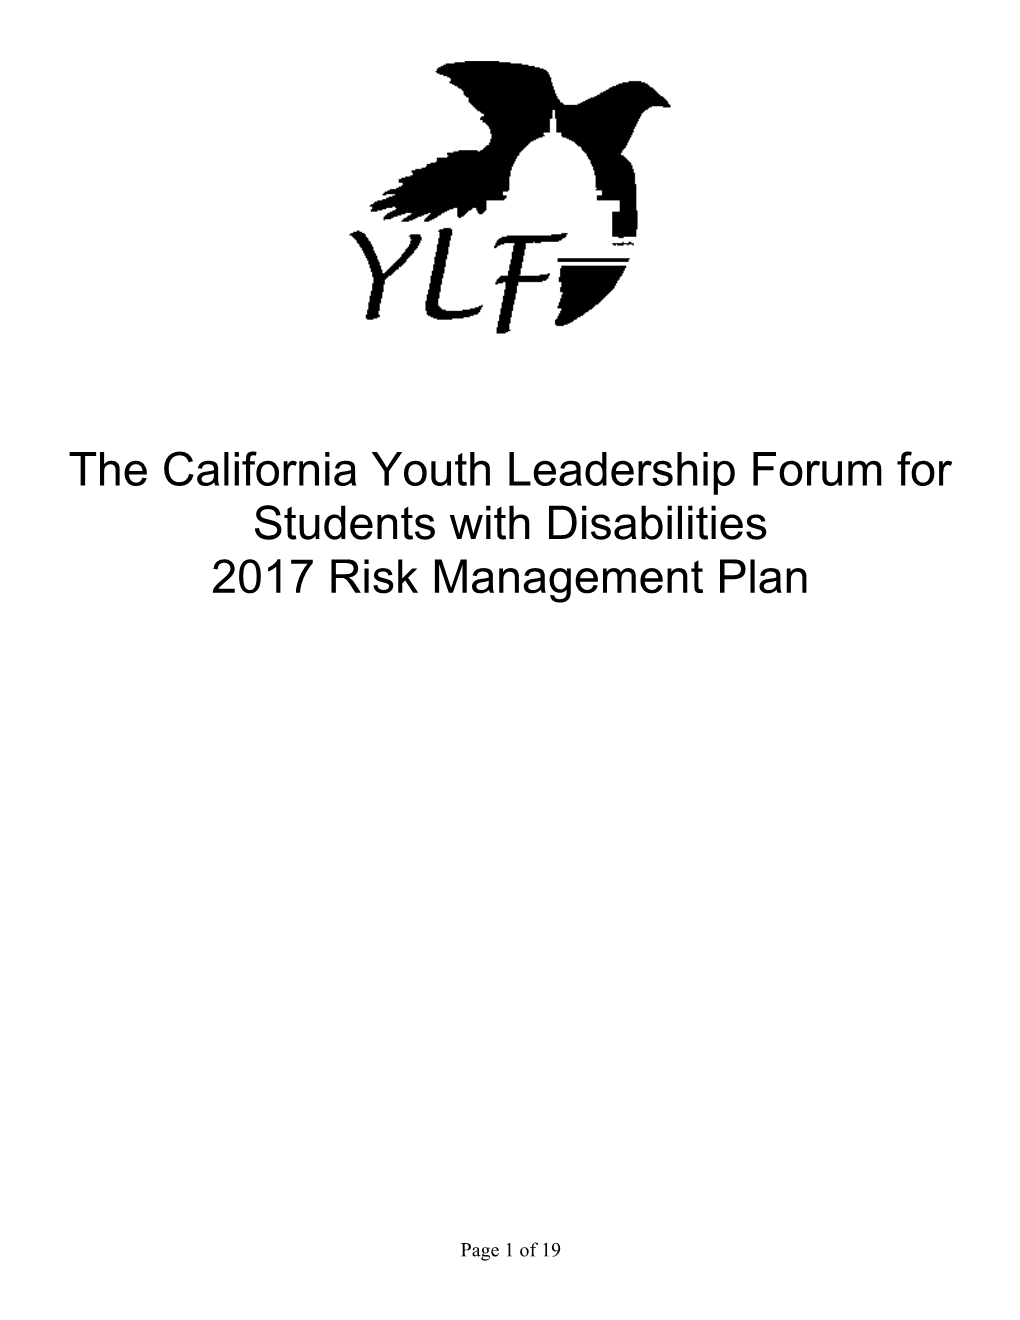 The California Youth Leadership Forum for Students with Disabilities